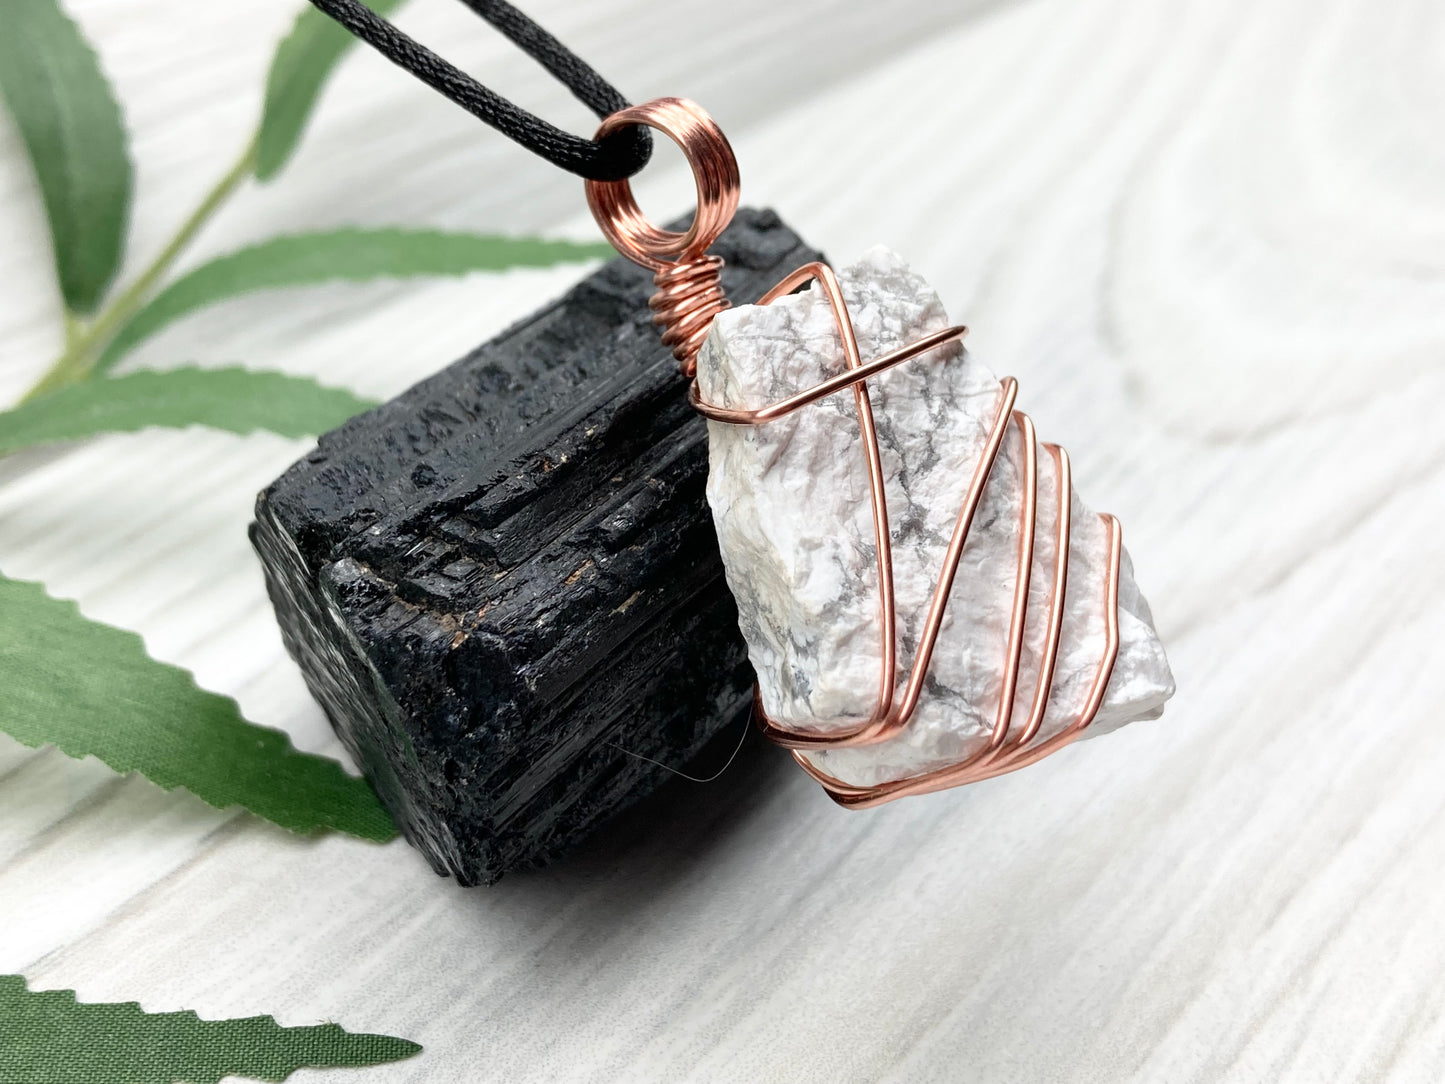 Raw Natural Howlite Necklace. White Crystal With Gray Marble Wrapped With Pure Copper Wire. Comes On A Black Chain. Metaphysical Boho Style Jewelry. Gemini Stone Pendant.